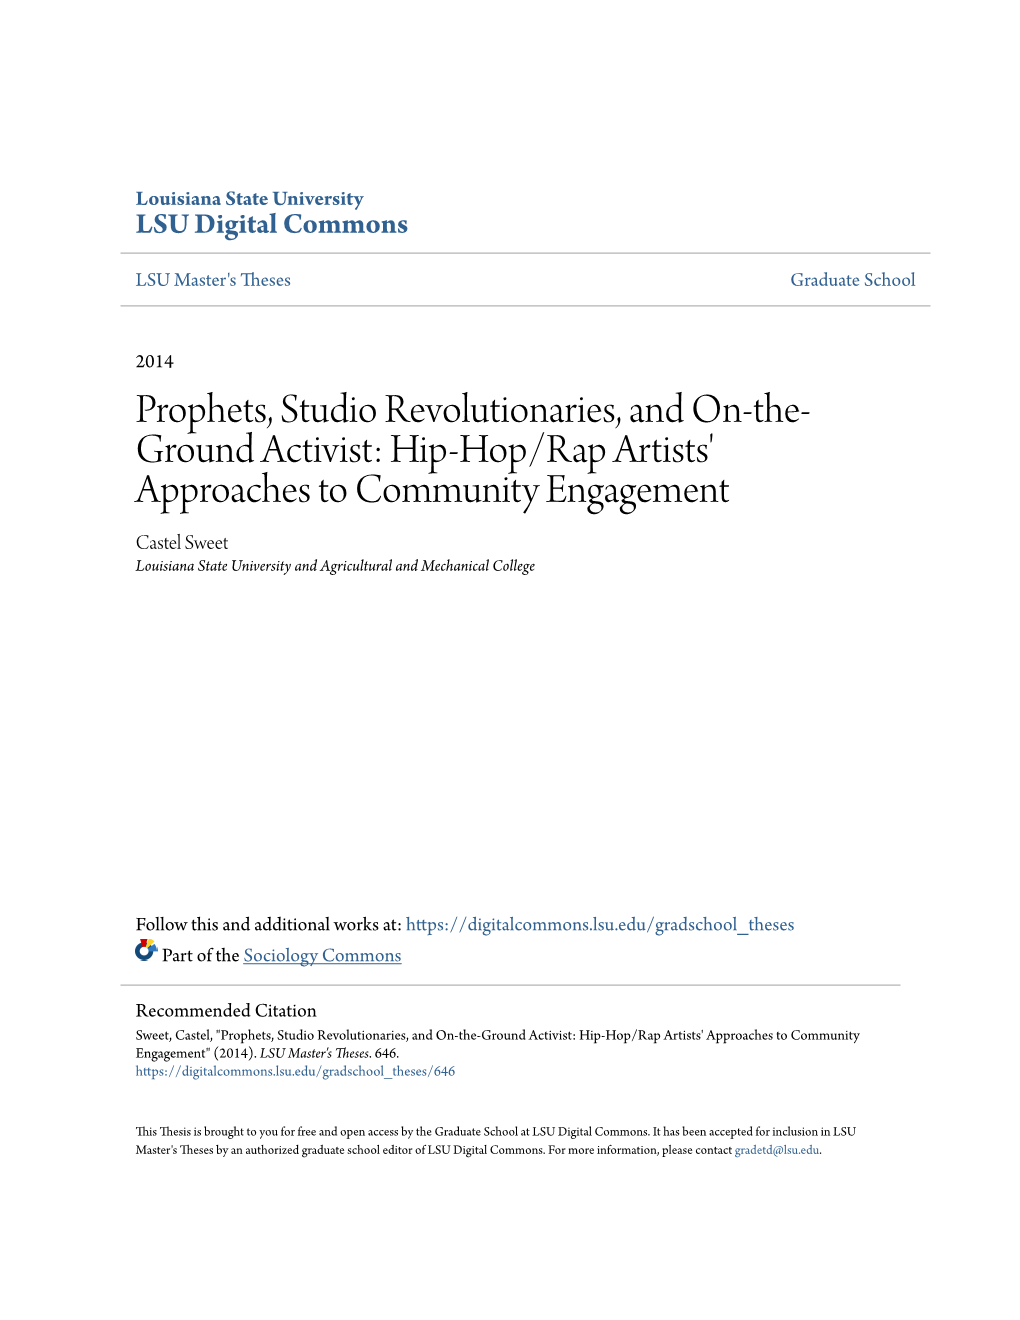 Hip-Hop/Rap Artists' Approaches to Community Engagement Castel Sweet Louisiana State University and Agricultural and Mechanical College